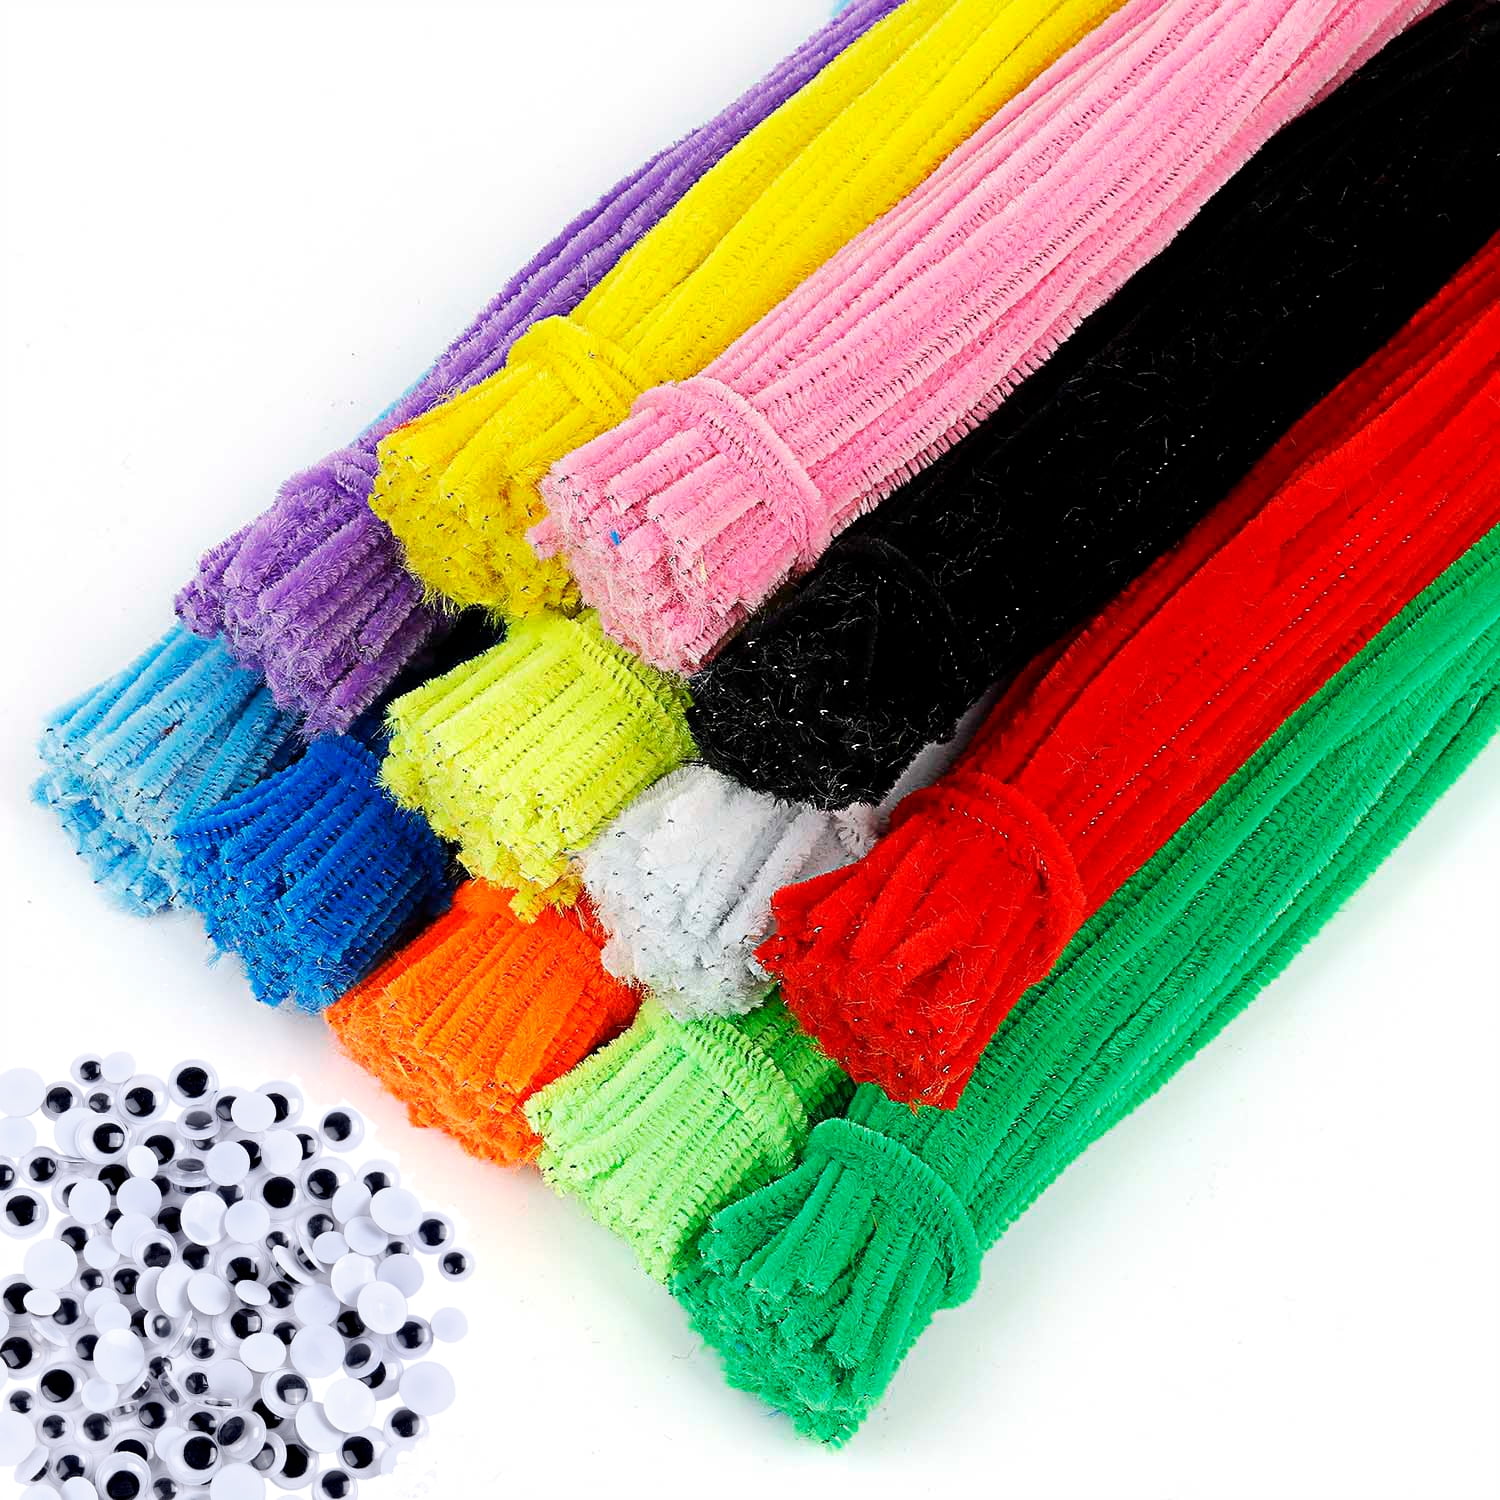 Caydo Assorted Art and Craft for Kids Include Chenille Stems Pom Poms, 